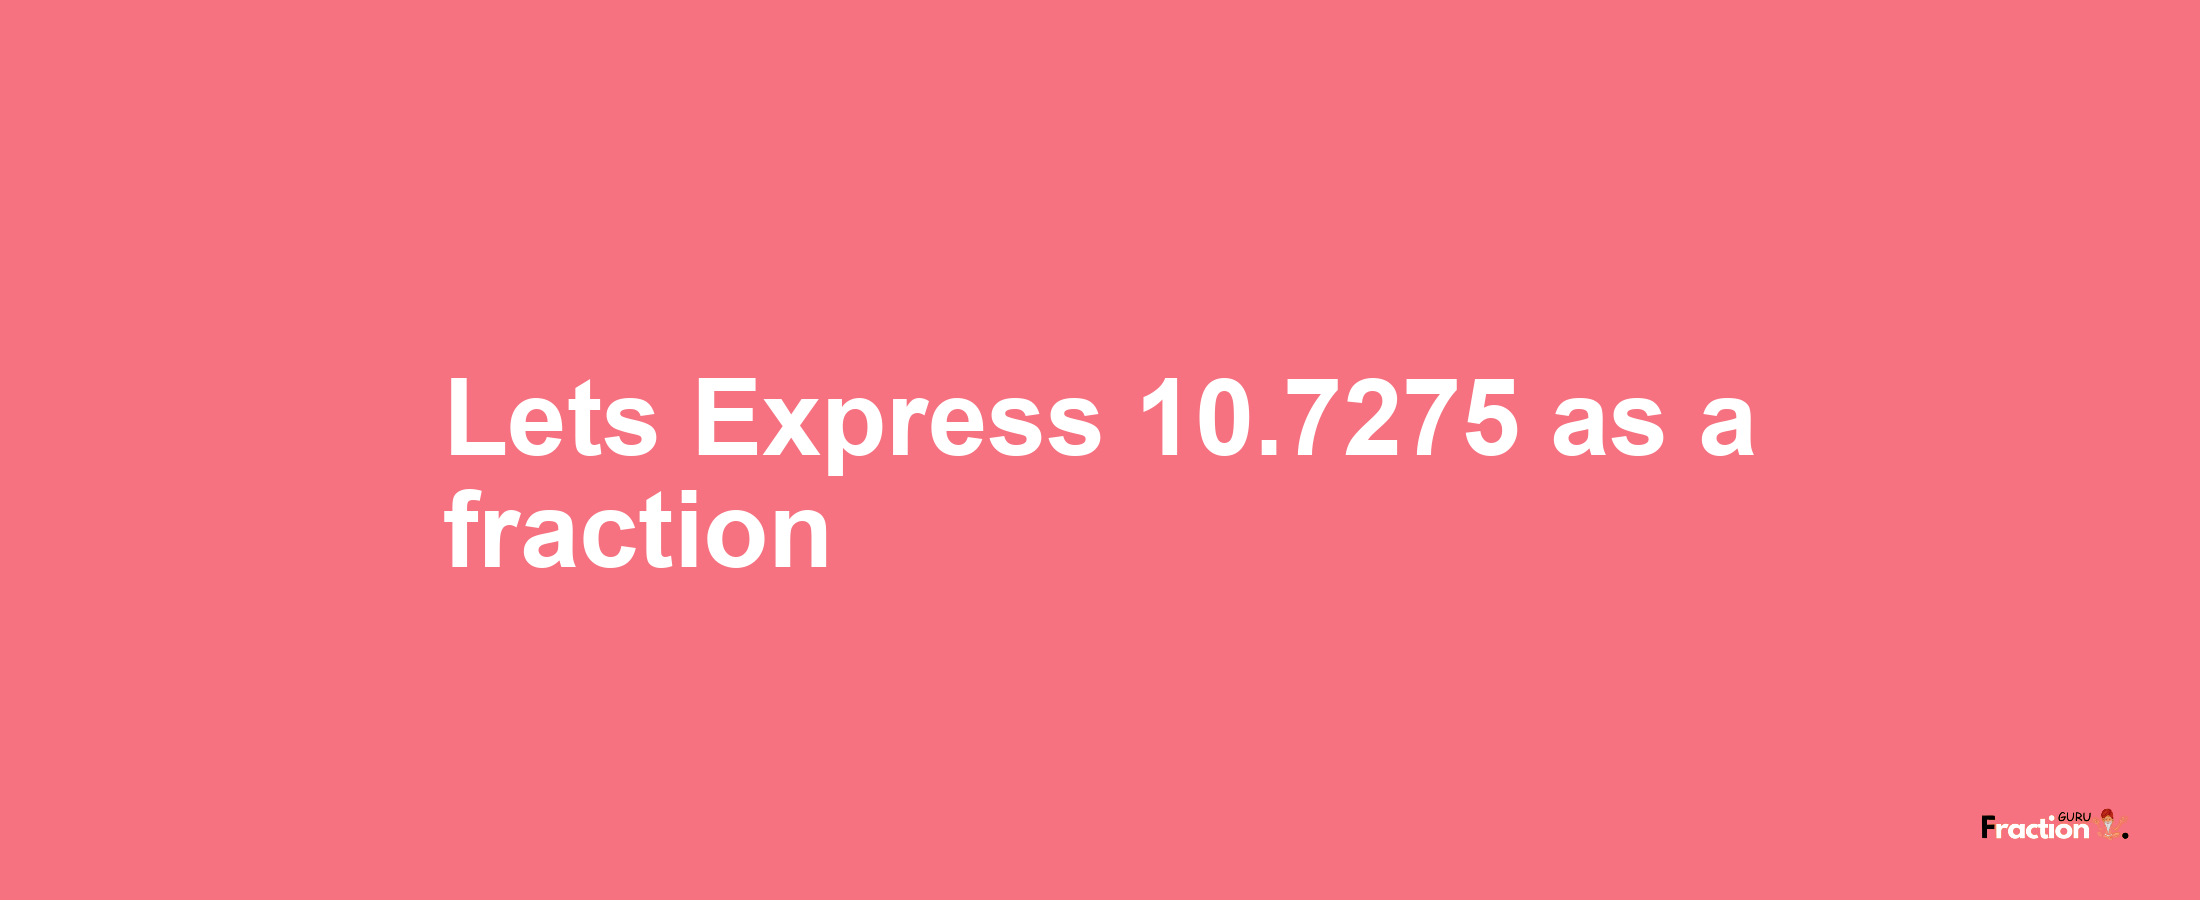 Lets Express 10.7275 as afraction